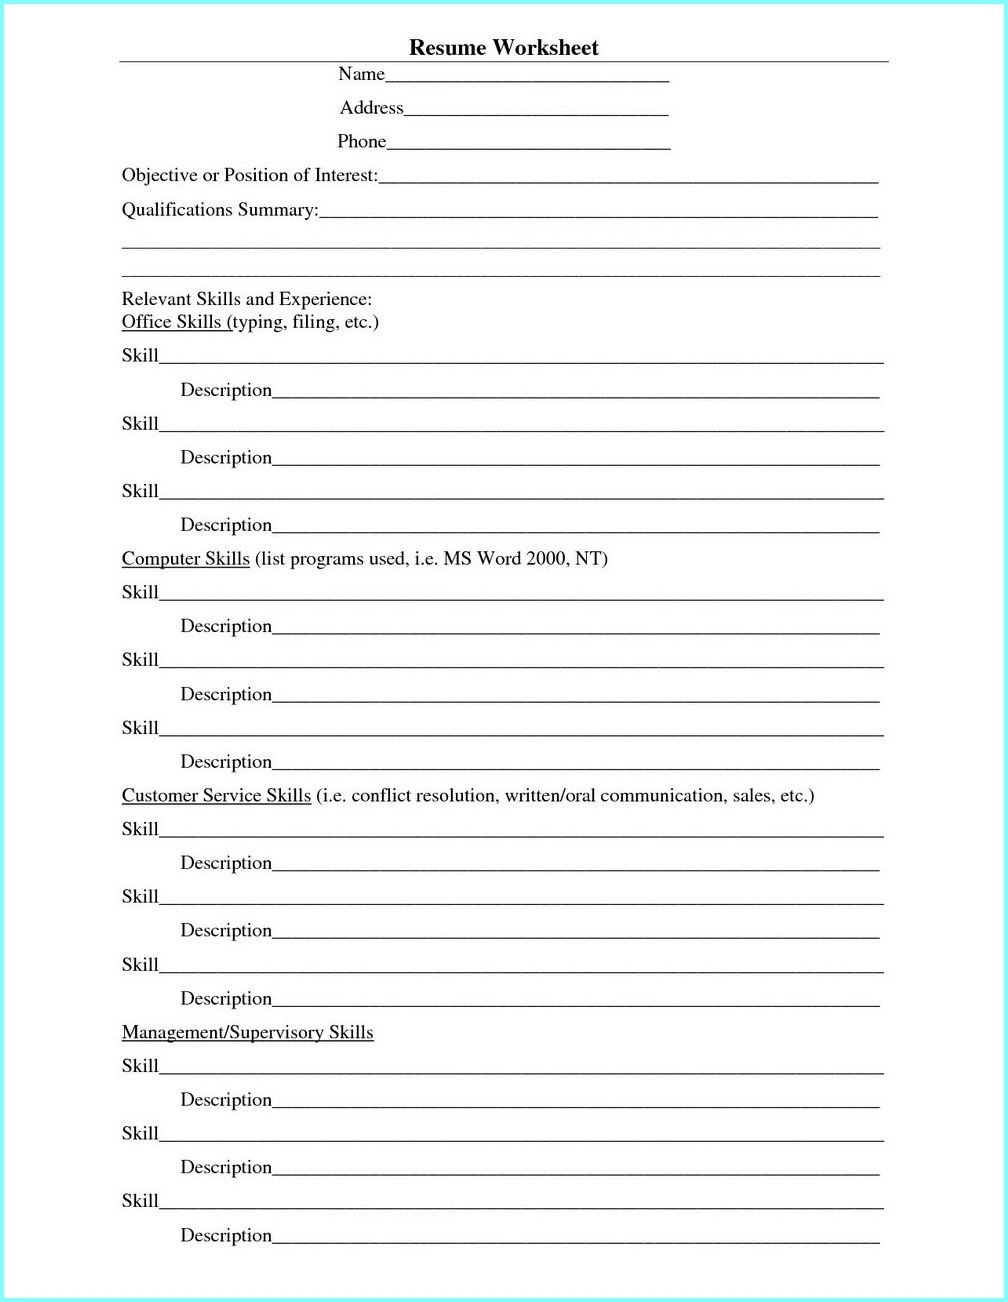 Fill In The Blank Resume Template For Highschool Students - Resume with regard to Fill In The Blank Template